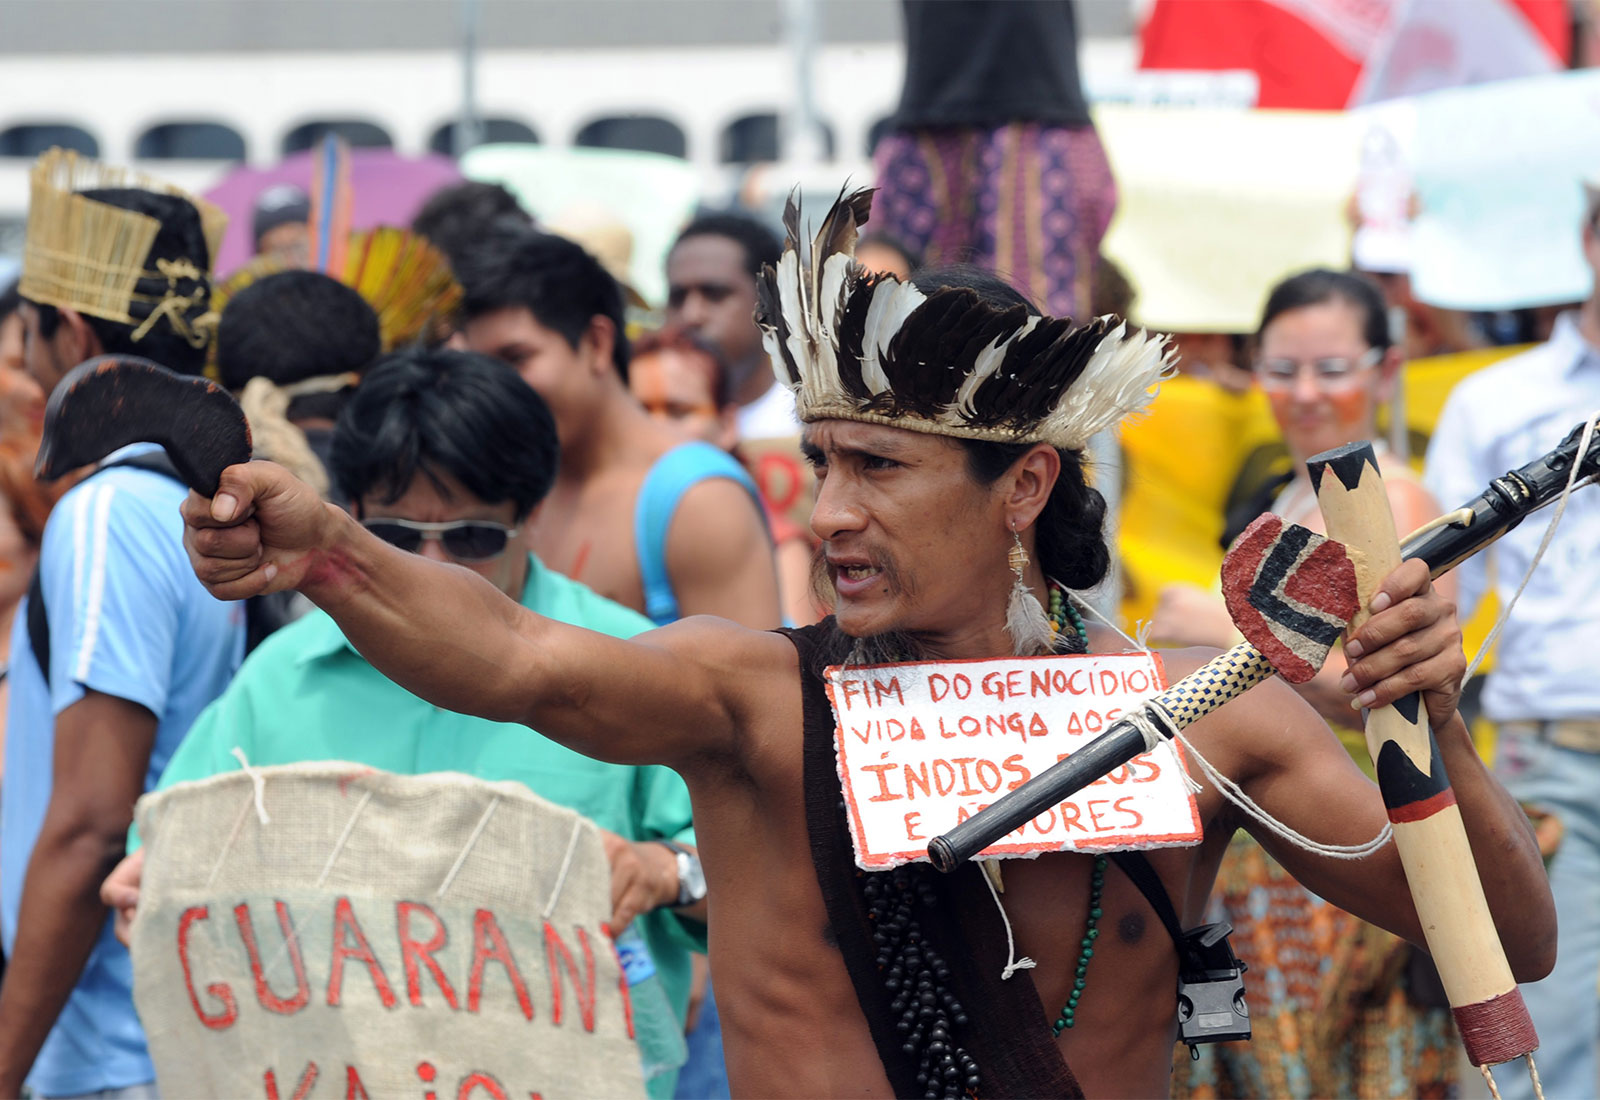 Crowd of people protesting the treatment of the Guarani-Kaiowa tribe in Brazil